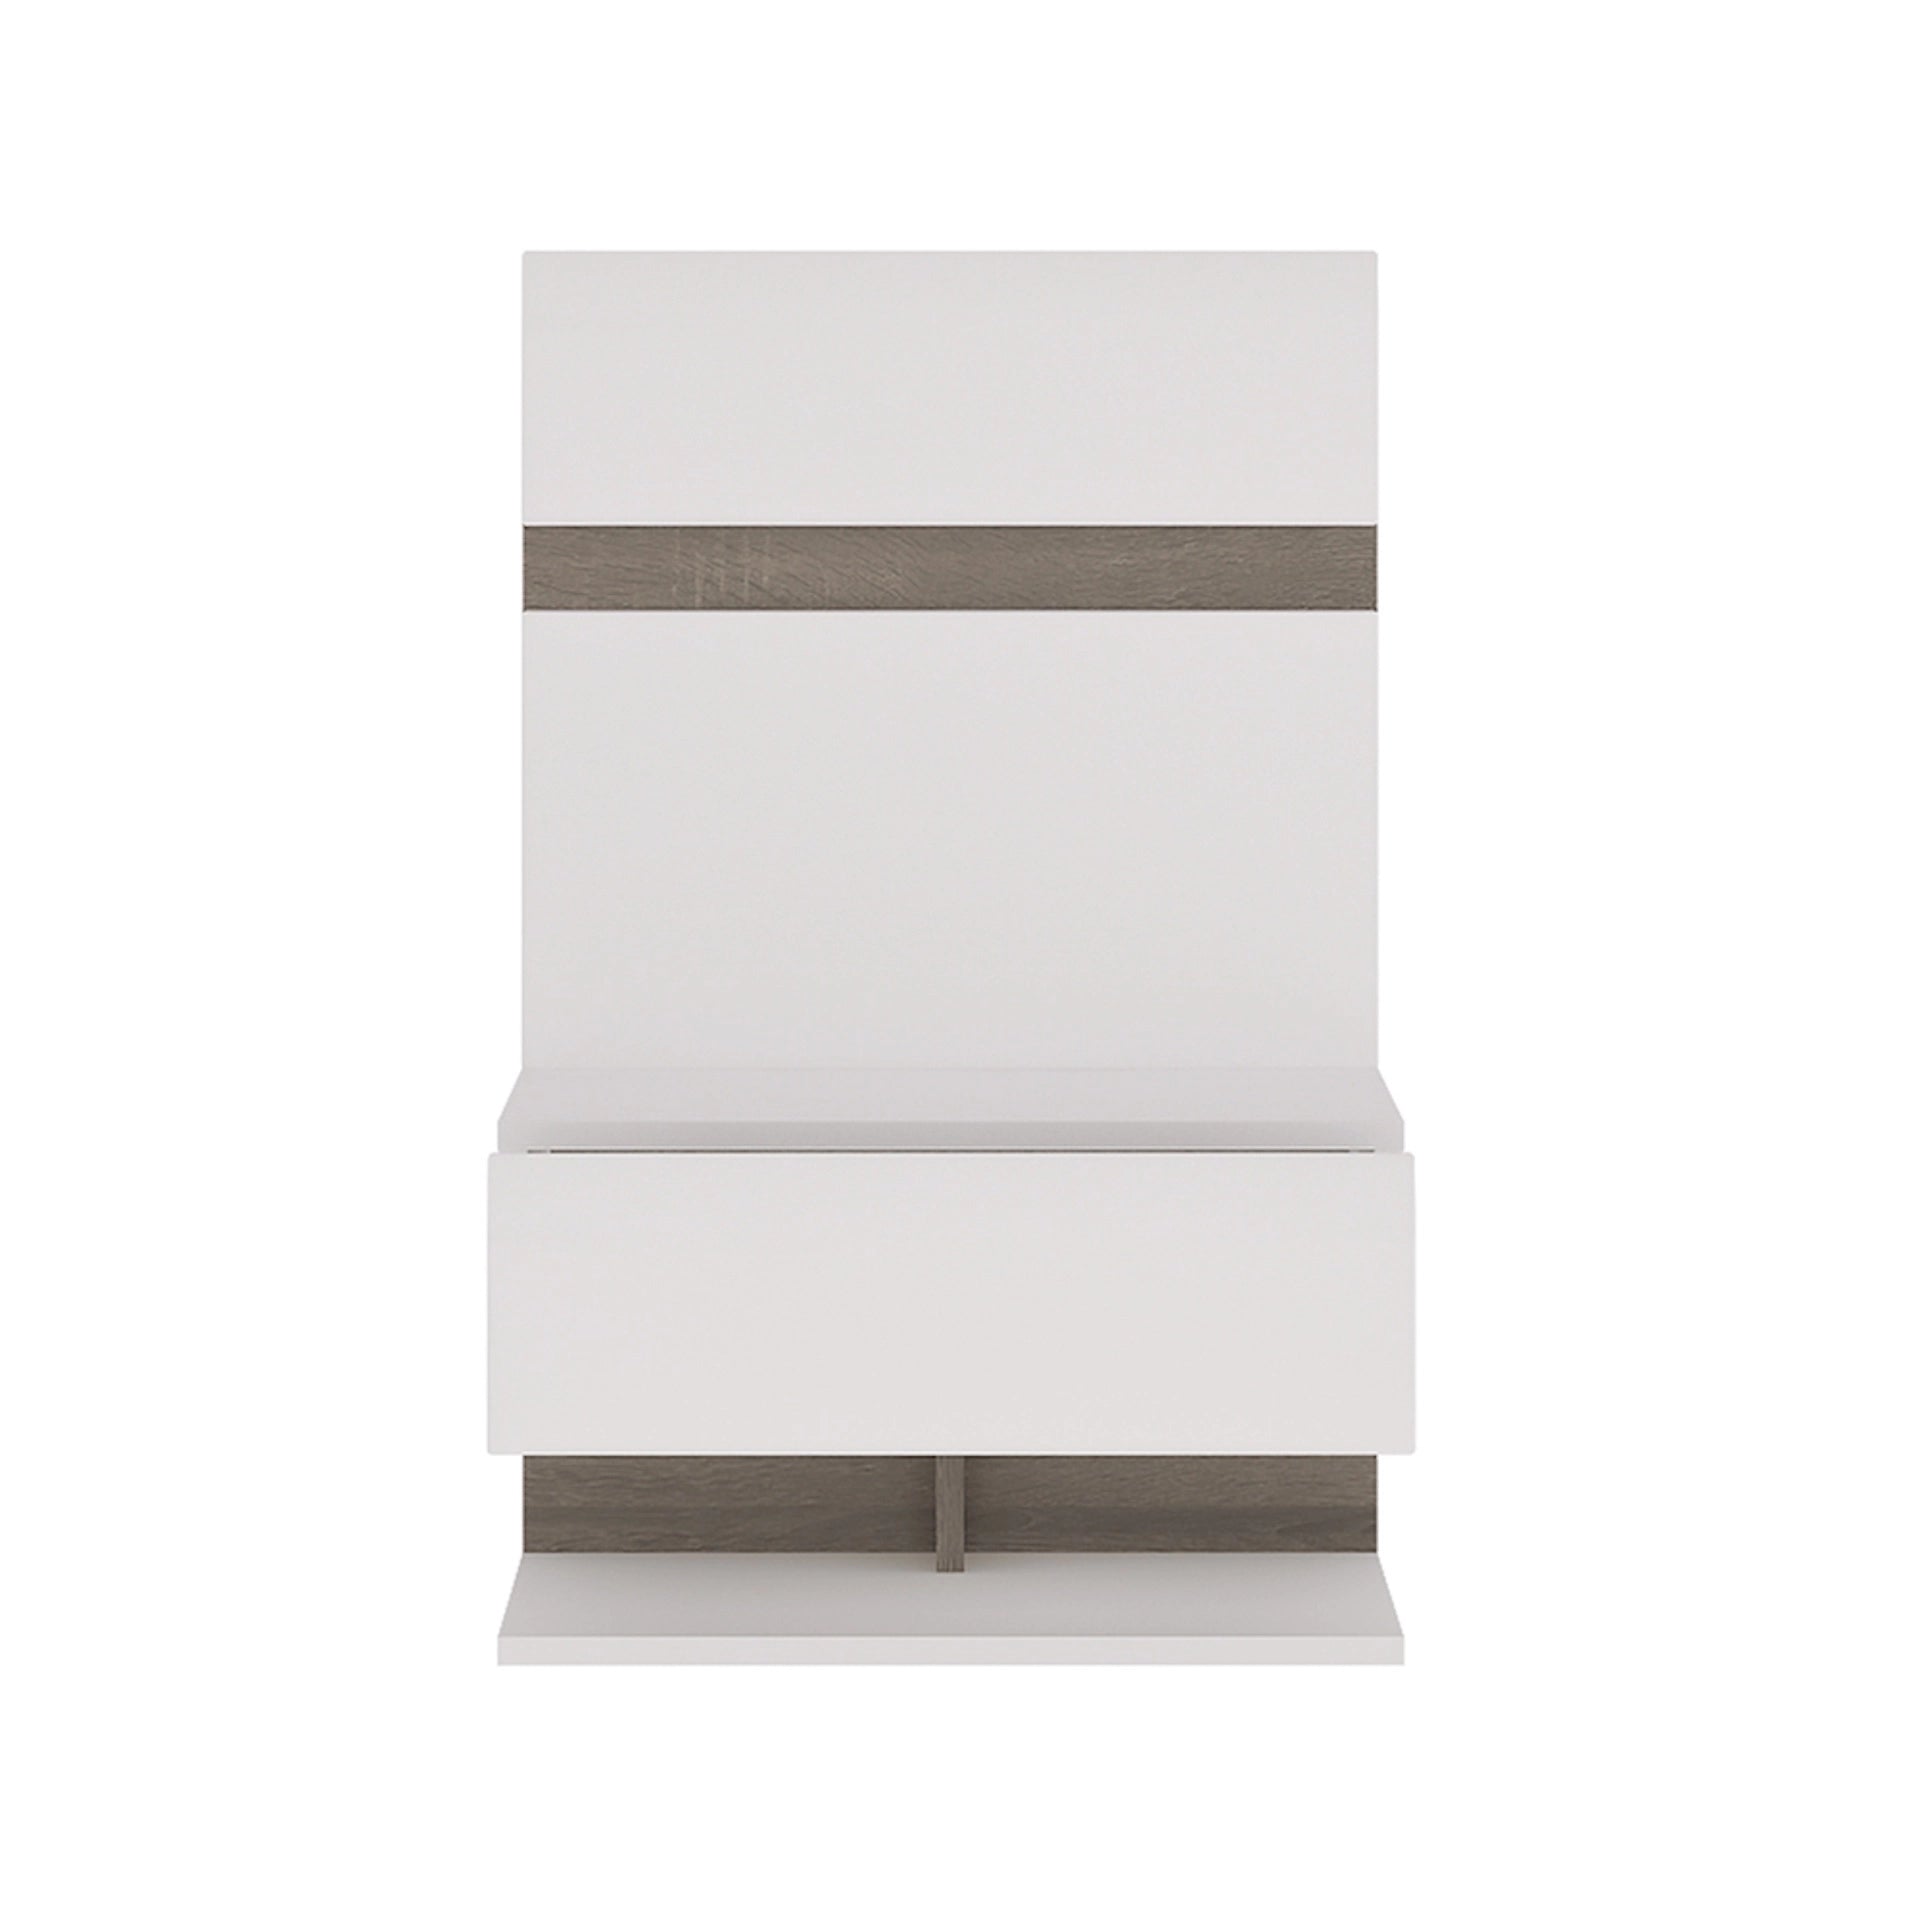 Furniture To Go Chelsea Bedside Extension For Bed in White with Oak Trim